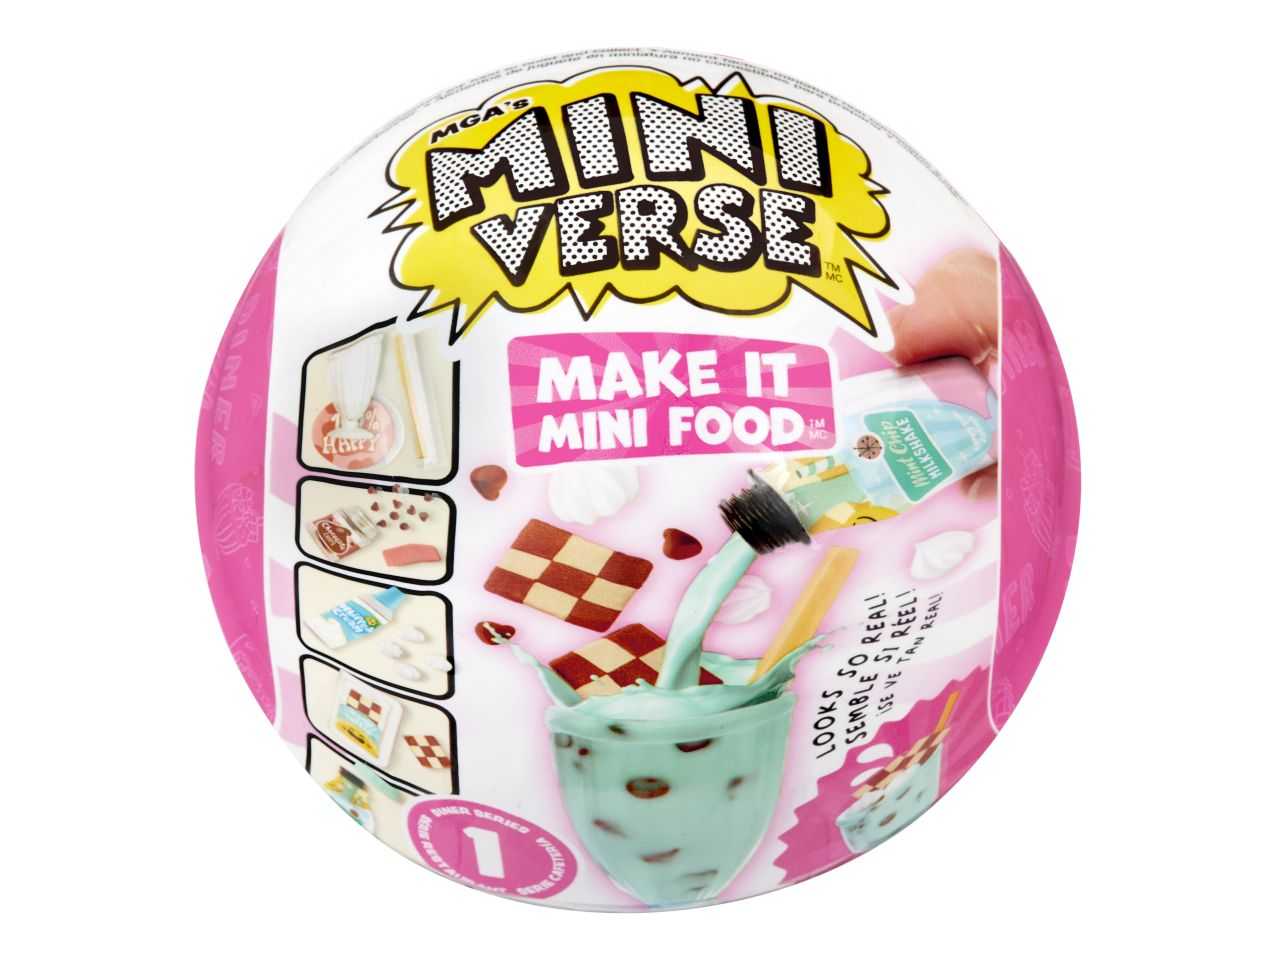 Make It Mini Food Diner Series 2 Pastry Shop Bundle (4 Pack) Mini  Collectibles - MGA's Miniverse, Blind Packaging, DIY, Resin, Replica Food,  Not Edible, Collectors, 8+ 